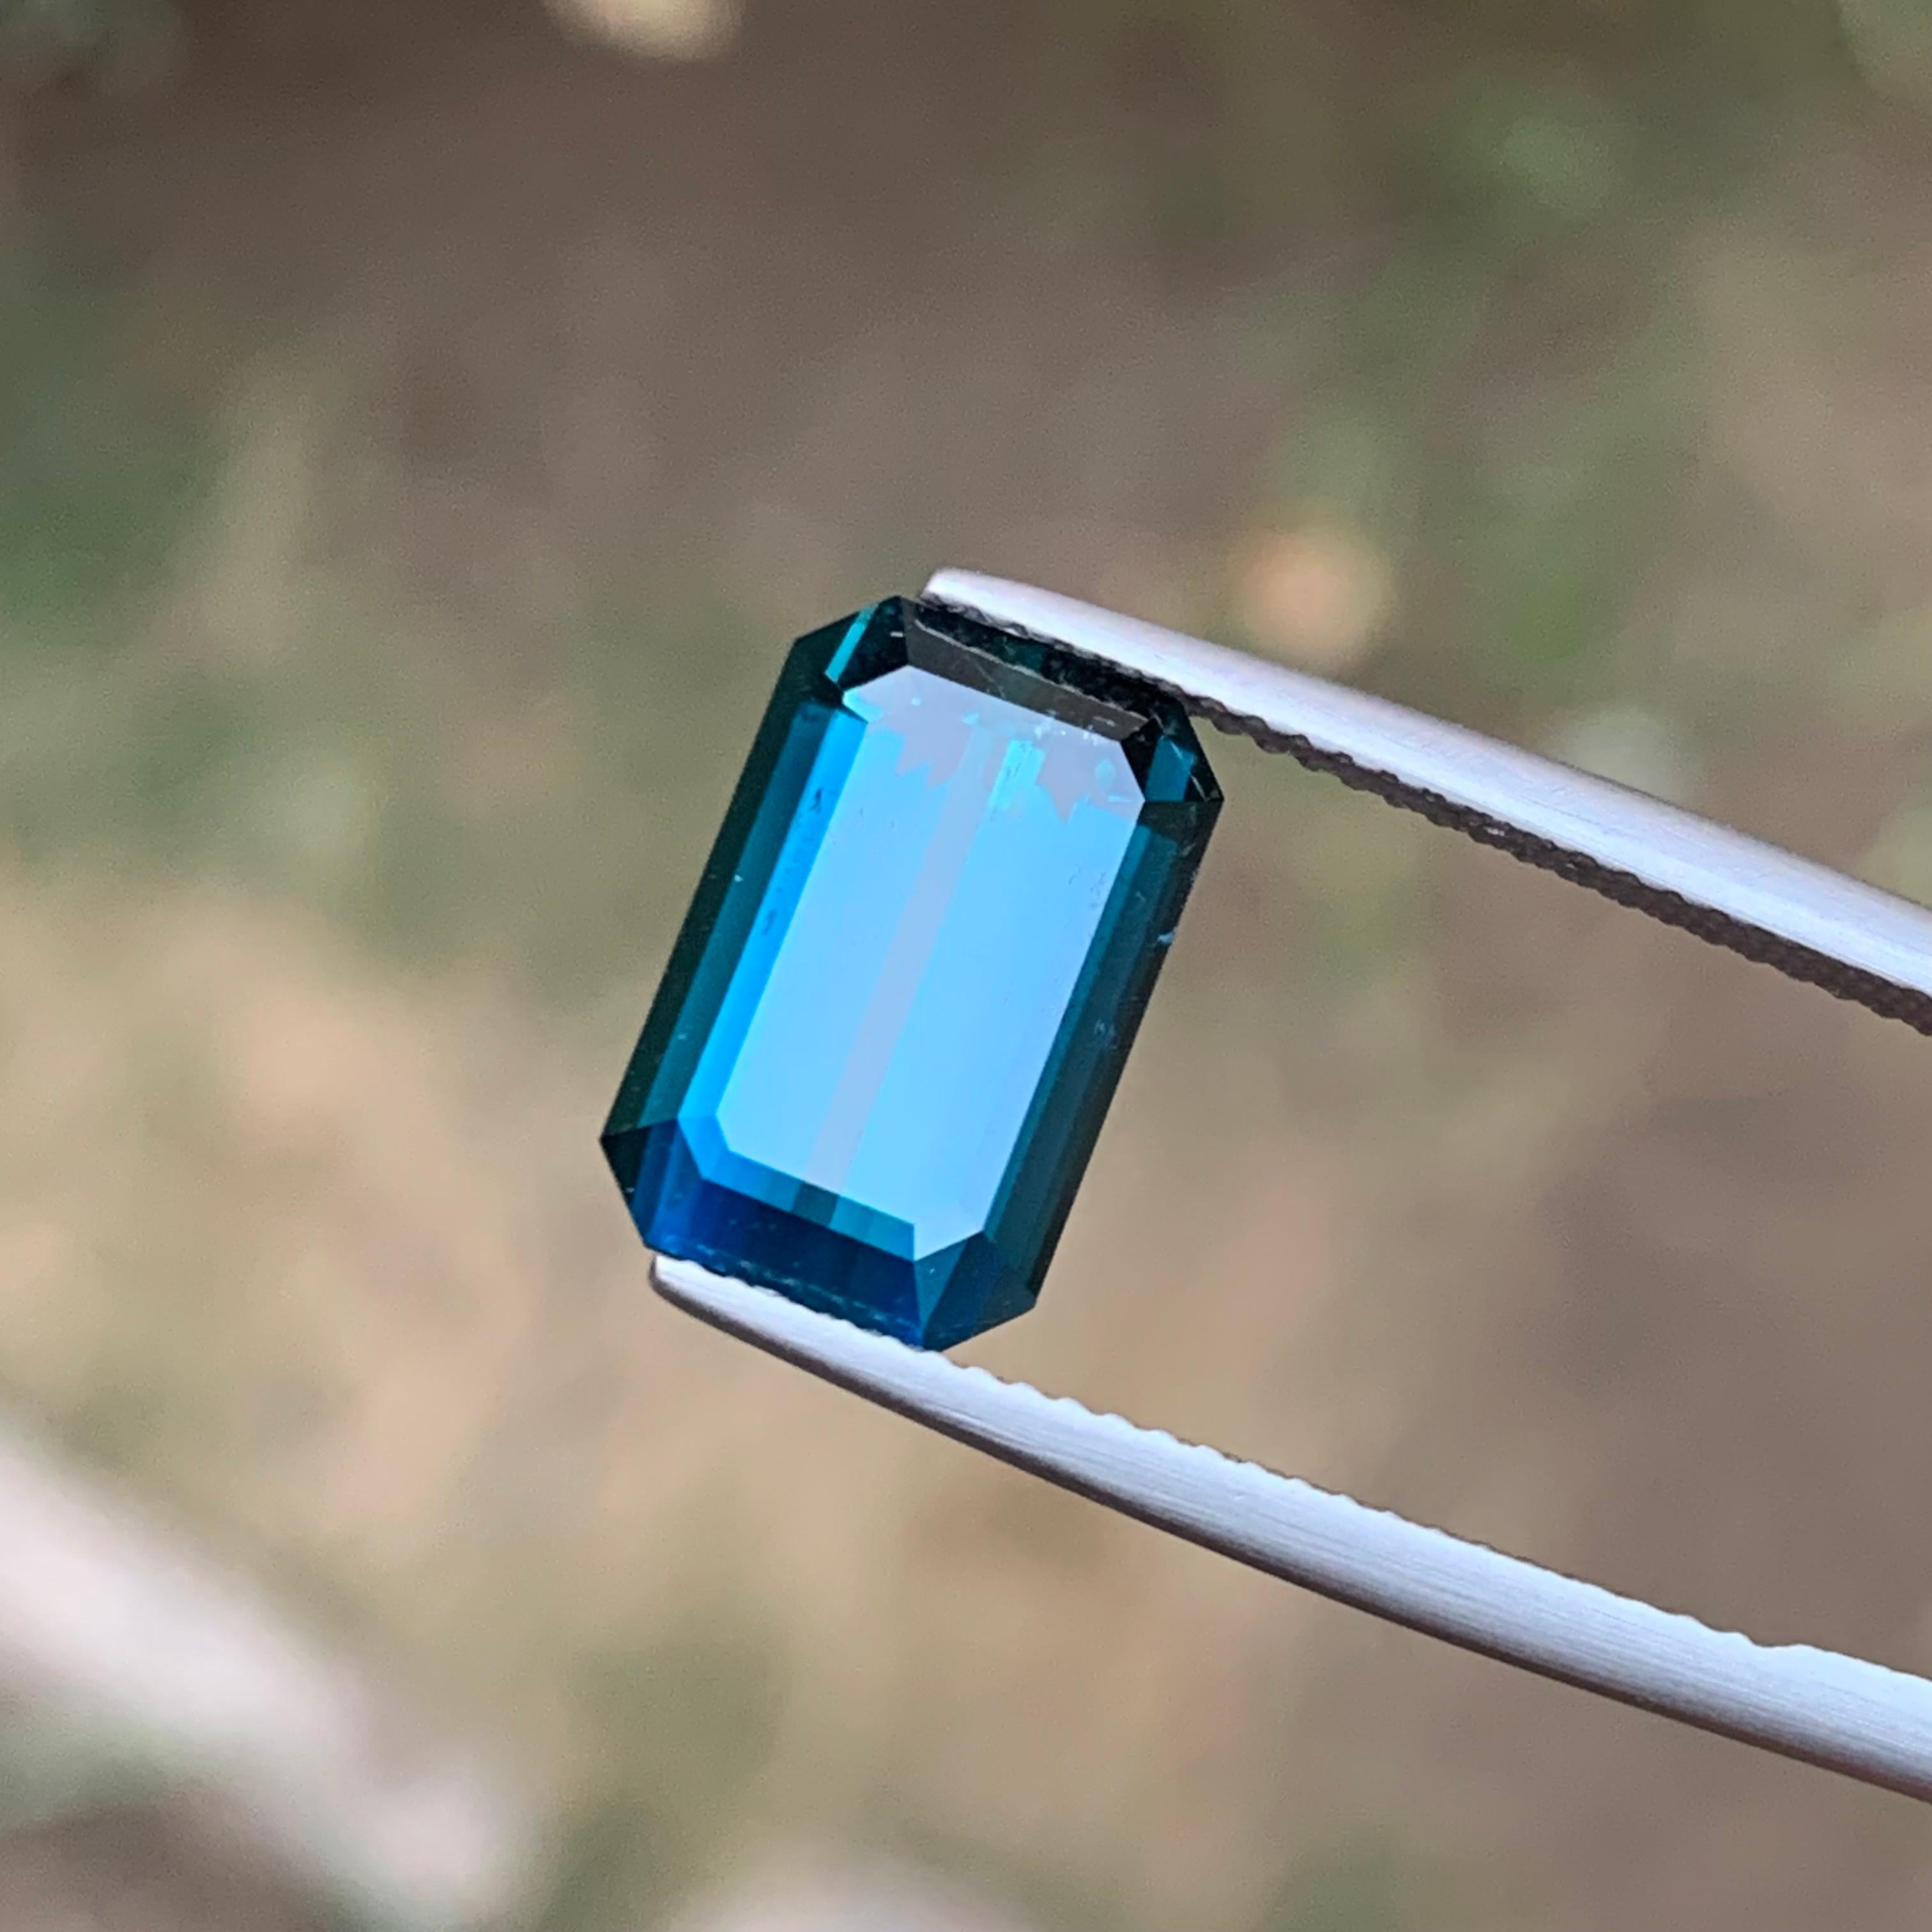 Rare Deep Inky Blue Natural Tourmaline Gemstone, 6.15 Ct Emerald Cut for Ring Af 7